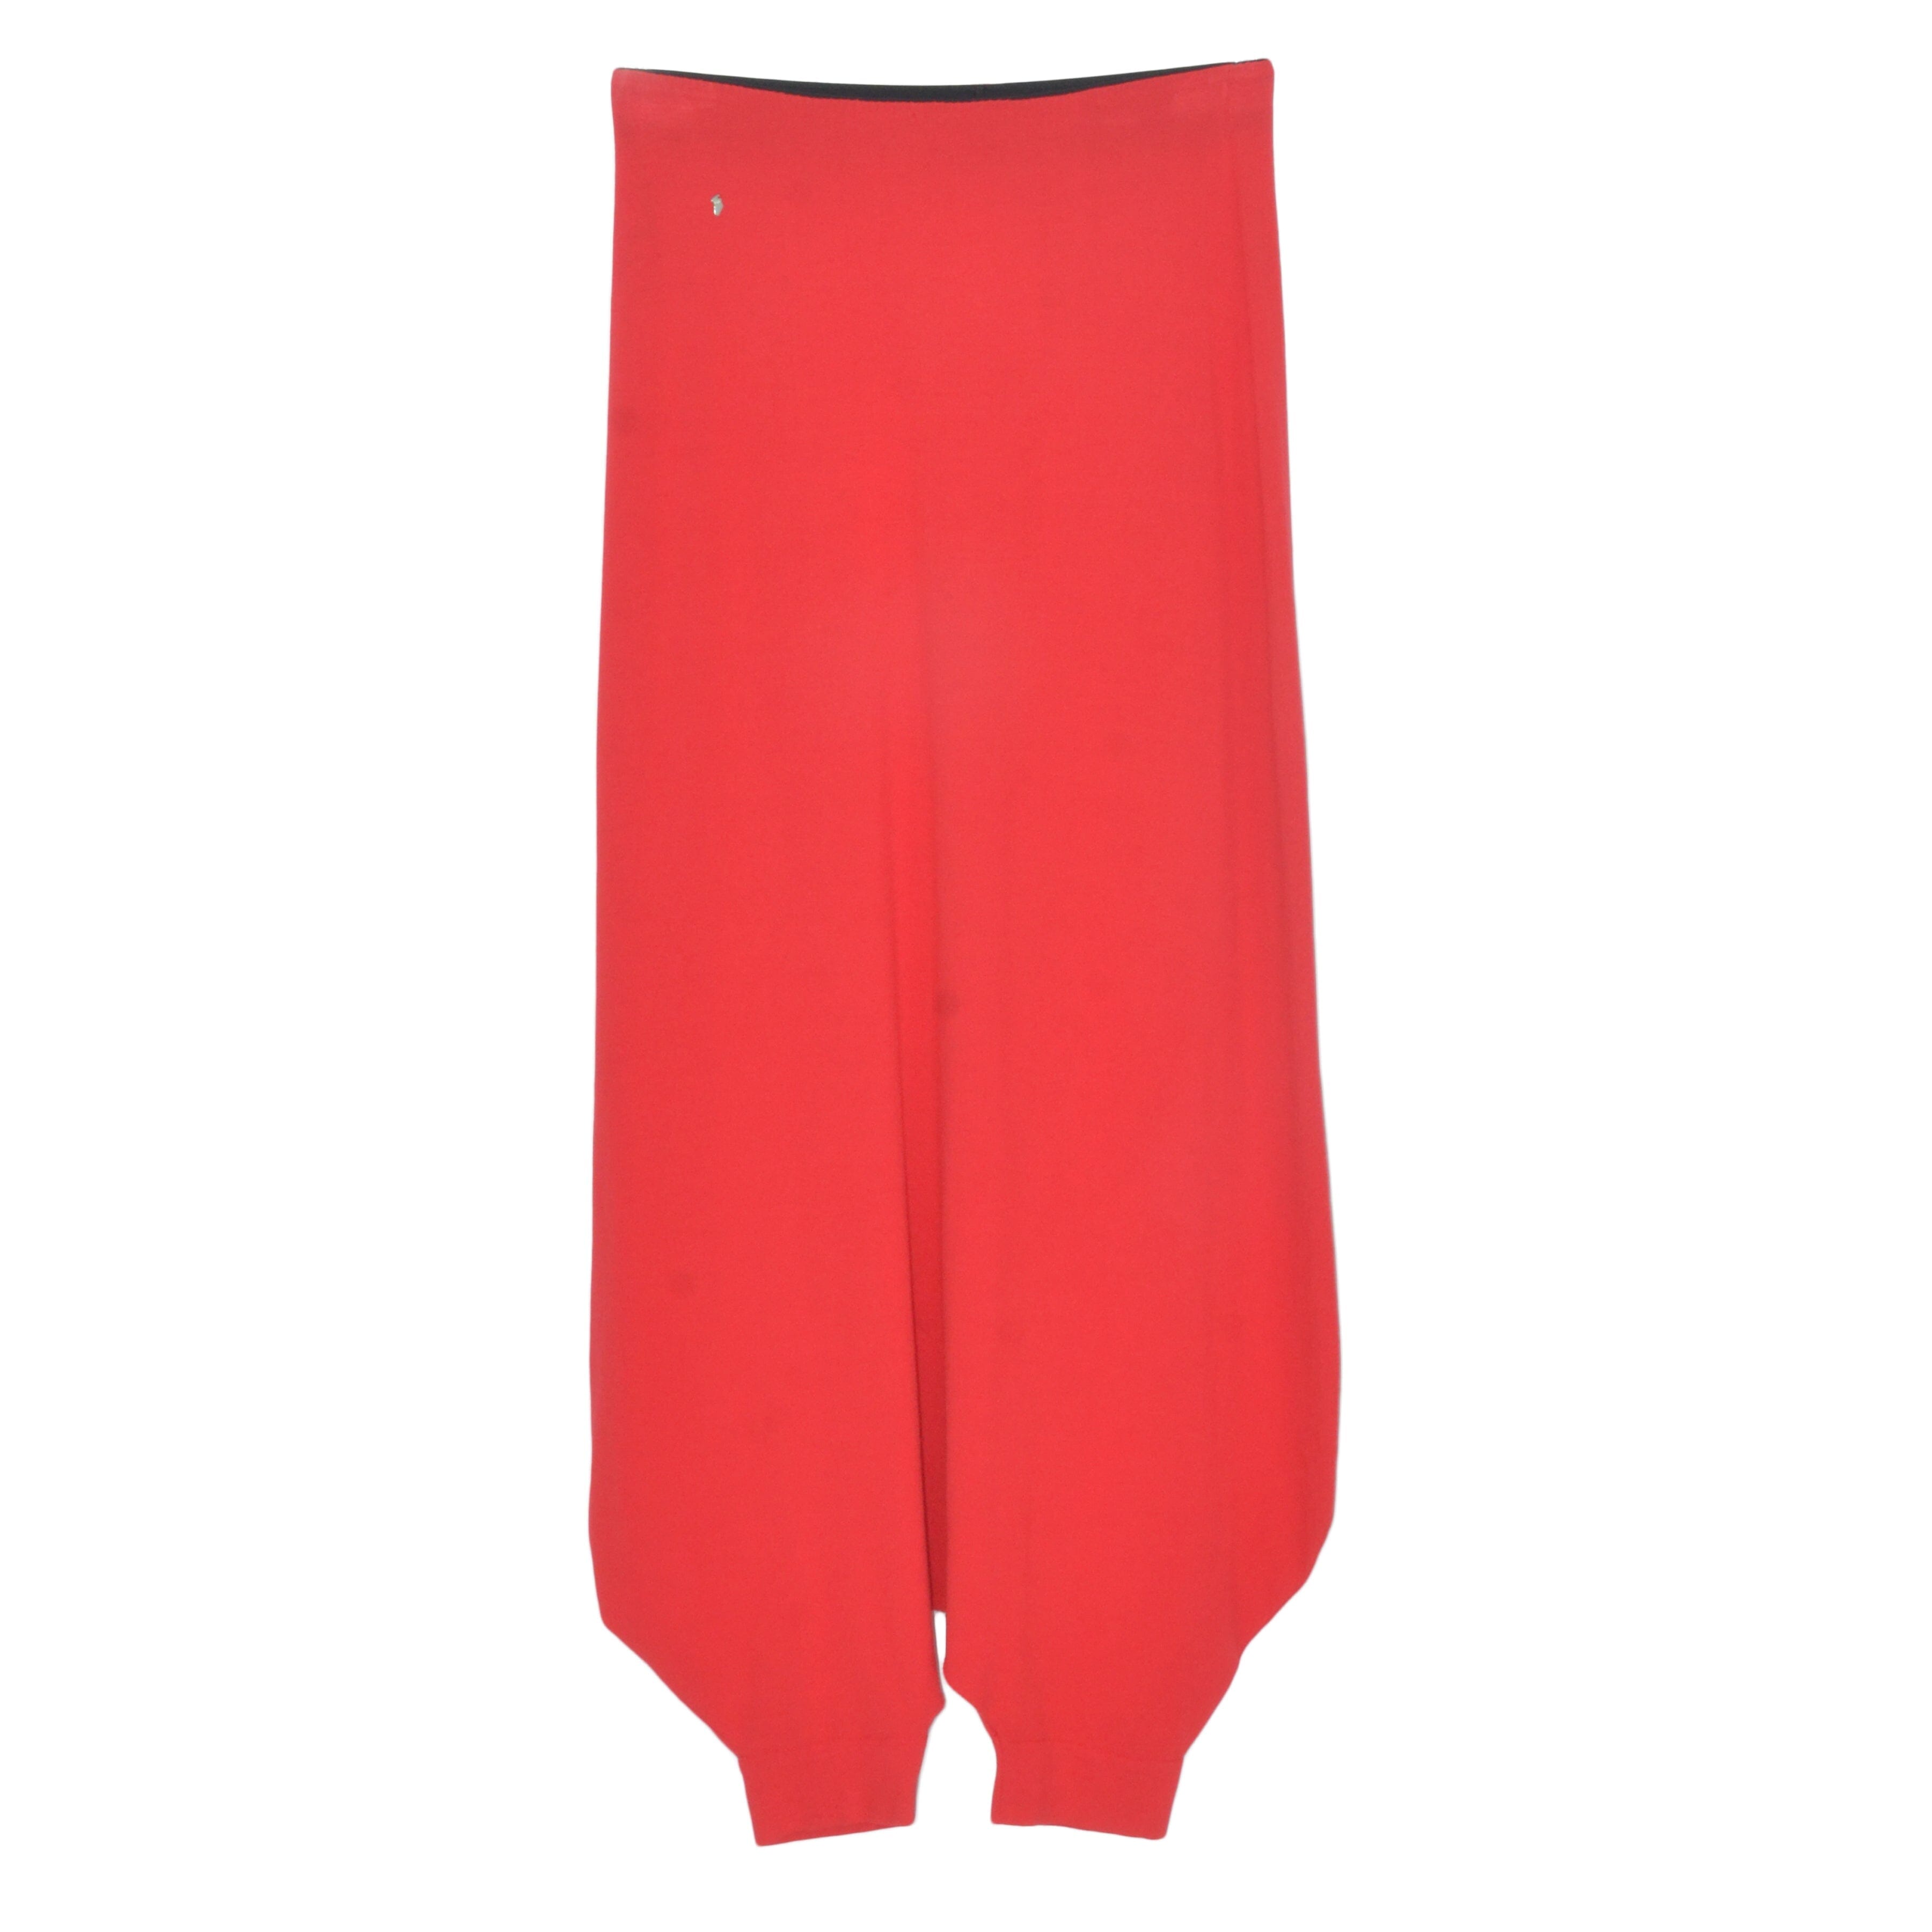 Red Knit Pant/Skirt Clothing Oblique Creations